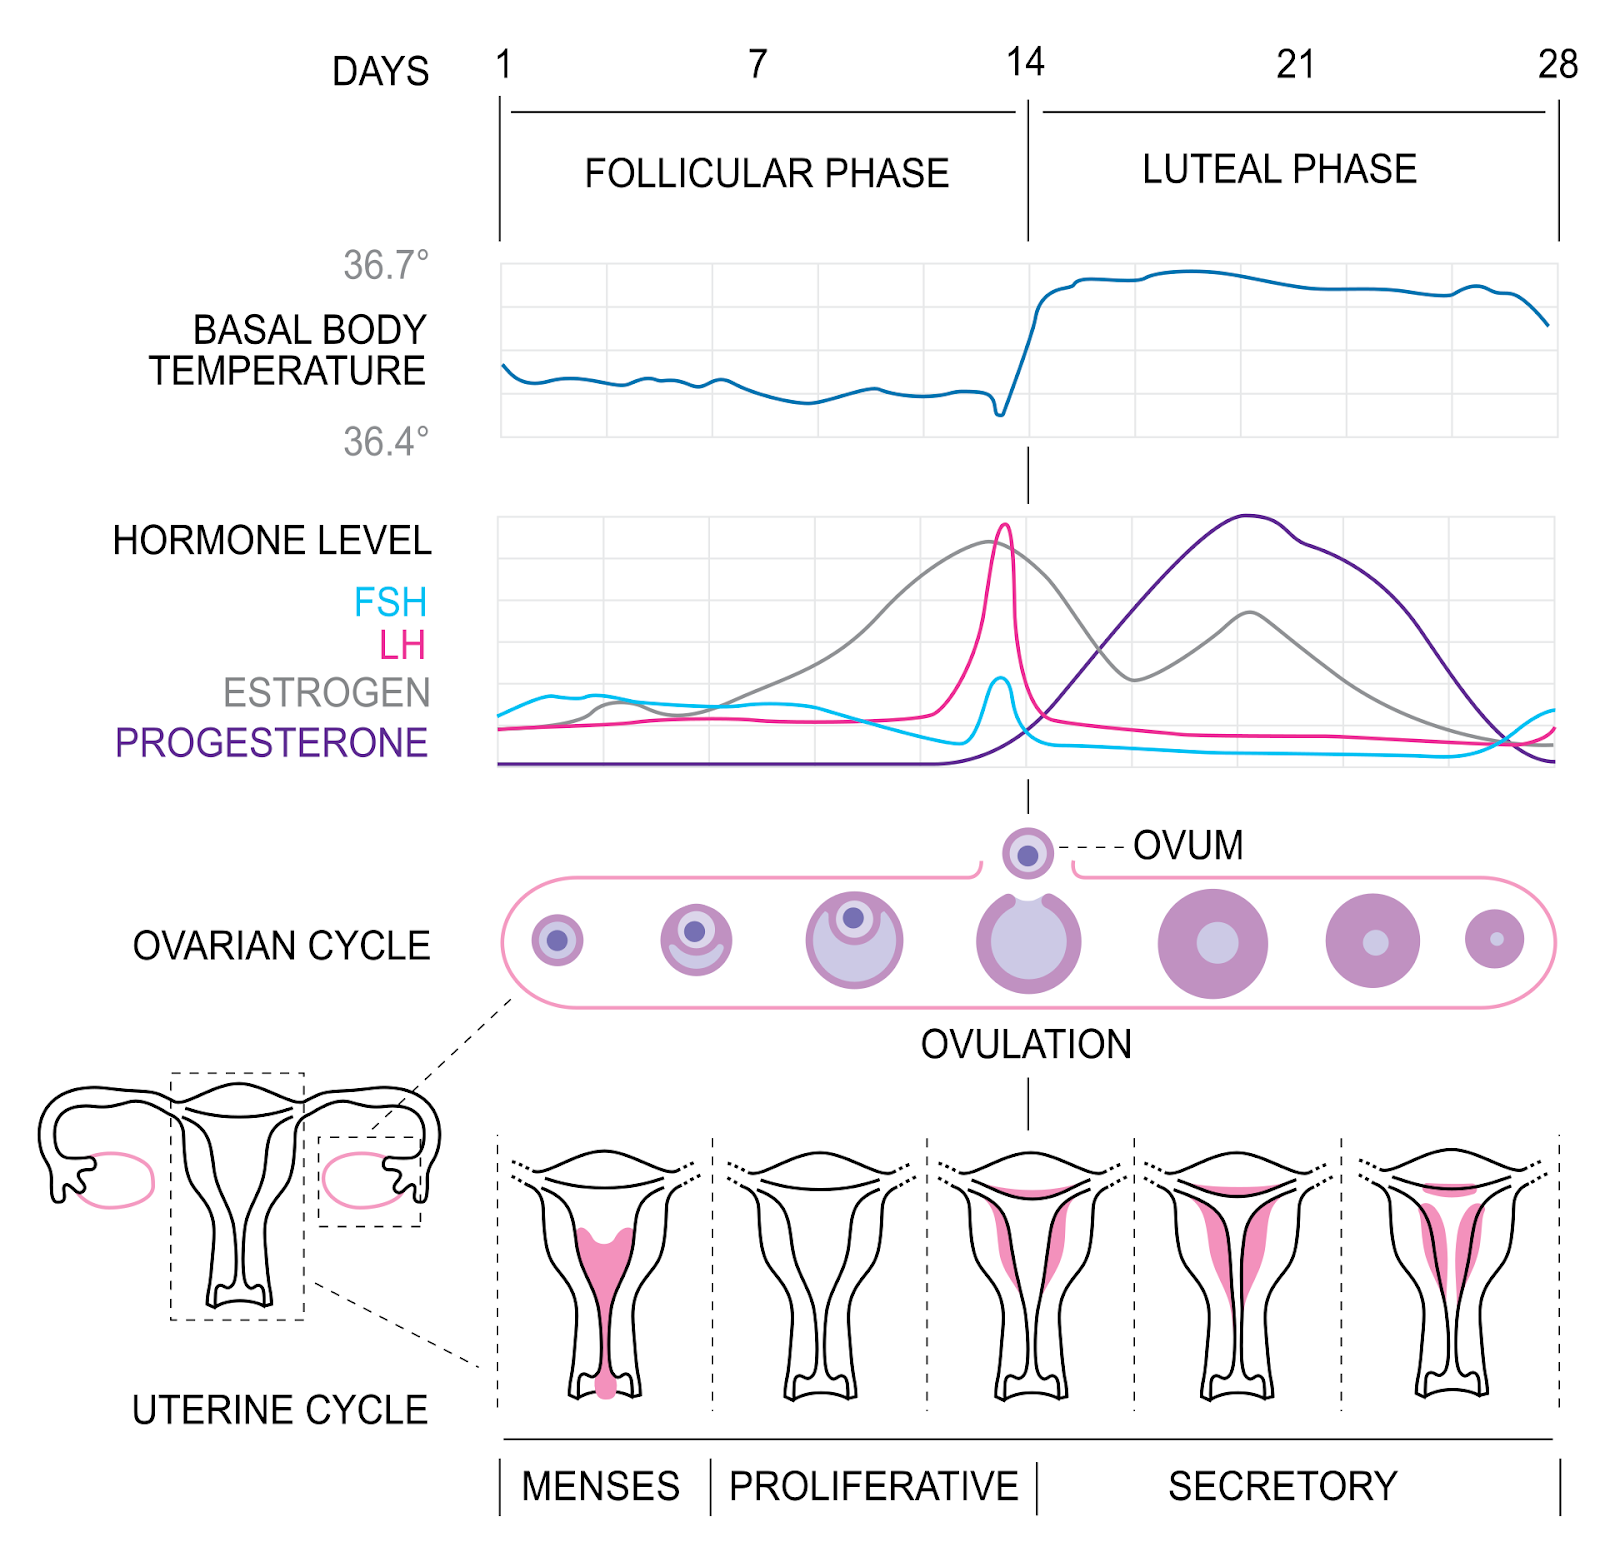 bloating during ovulation - Infographic explaining the associations of body temperature, hormone levels, and menstrual phase during the menstrual cycle.